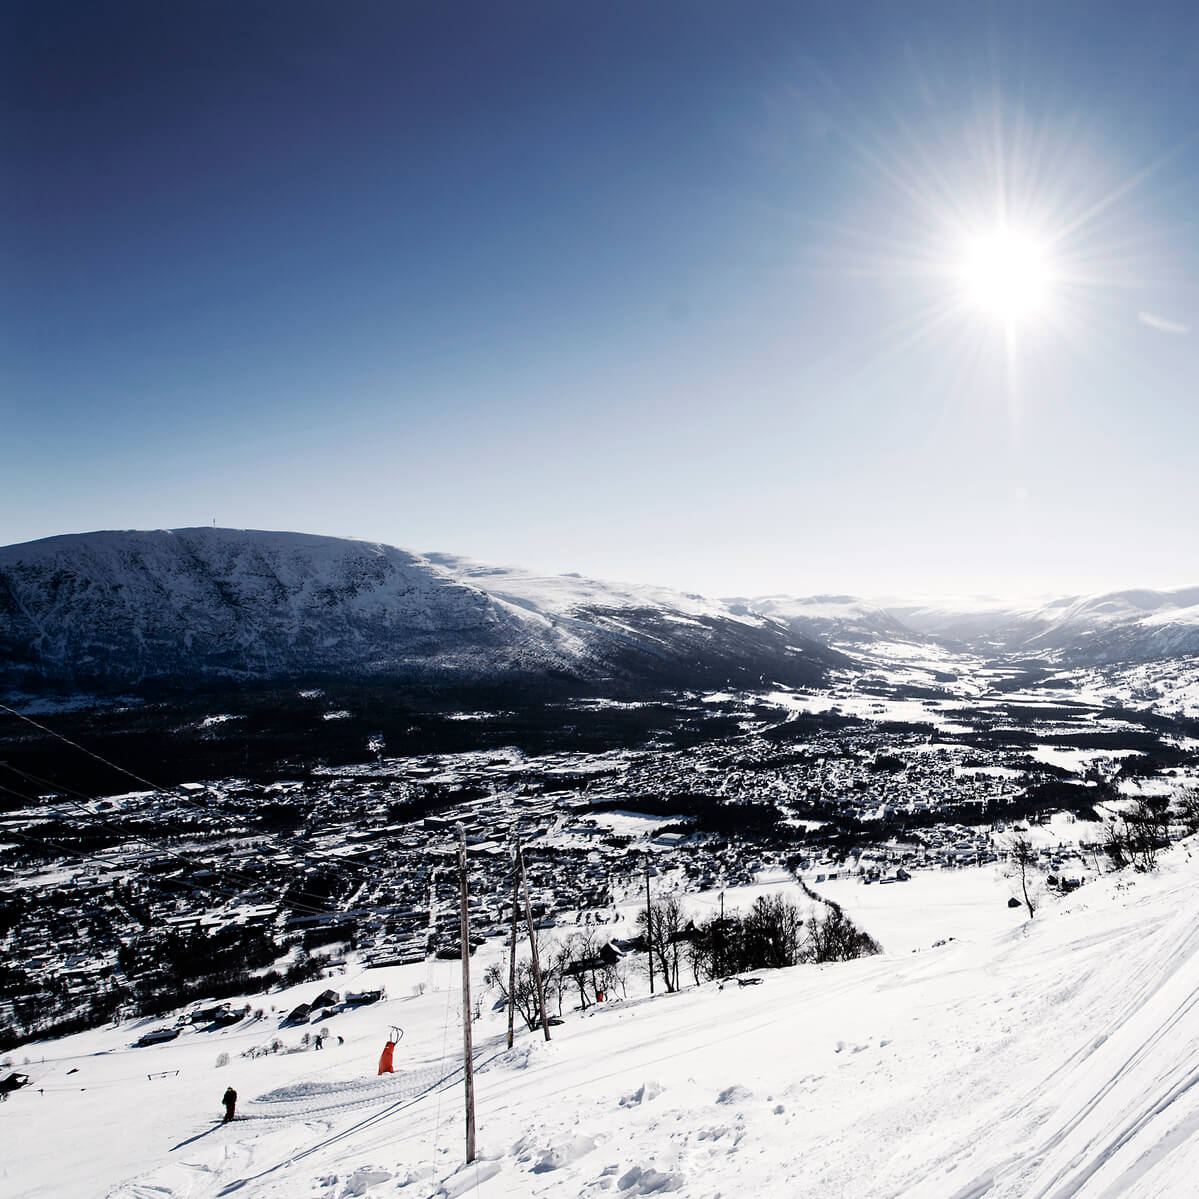 Ski slopes in Central Norway's largest alpine skiing area, Oppdal.